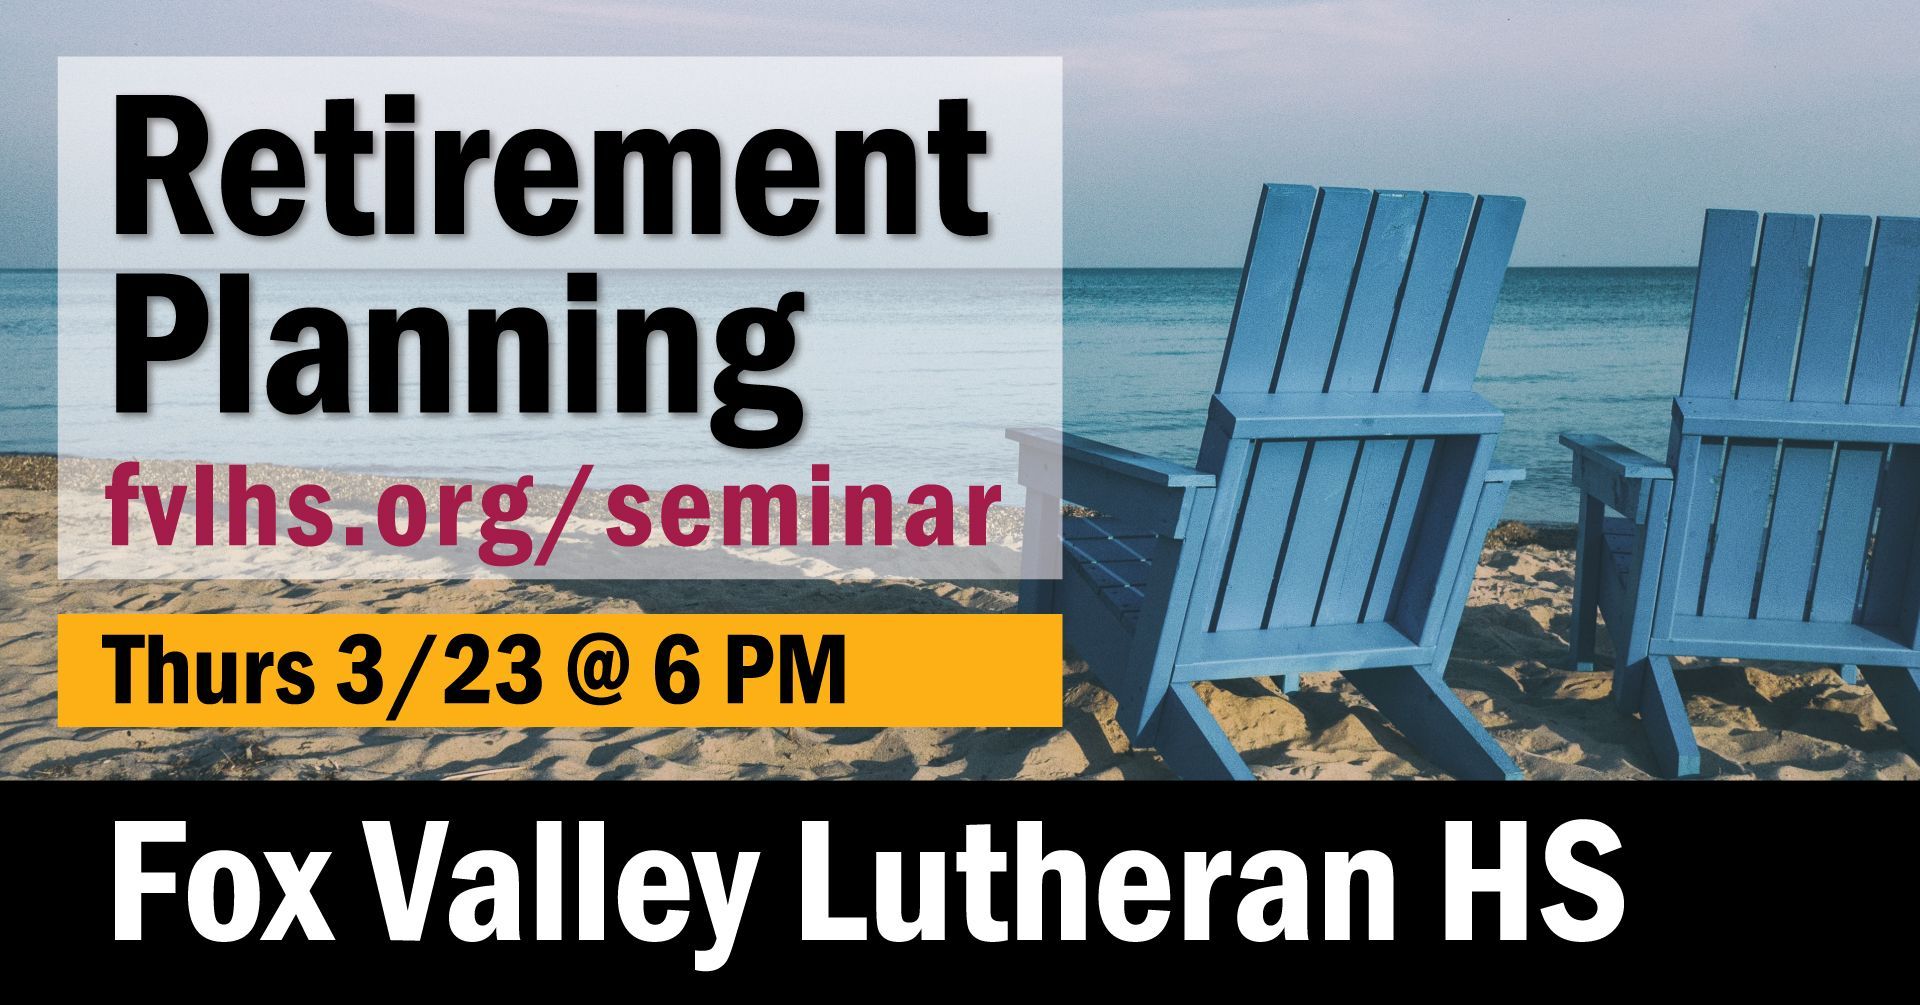 Retirement Planning Seminar, Thursday March 23 at 6 PM